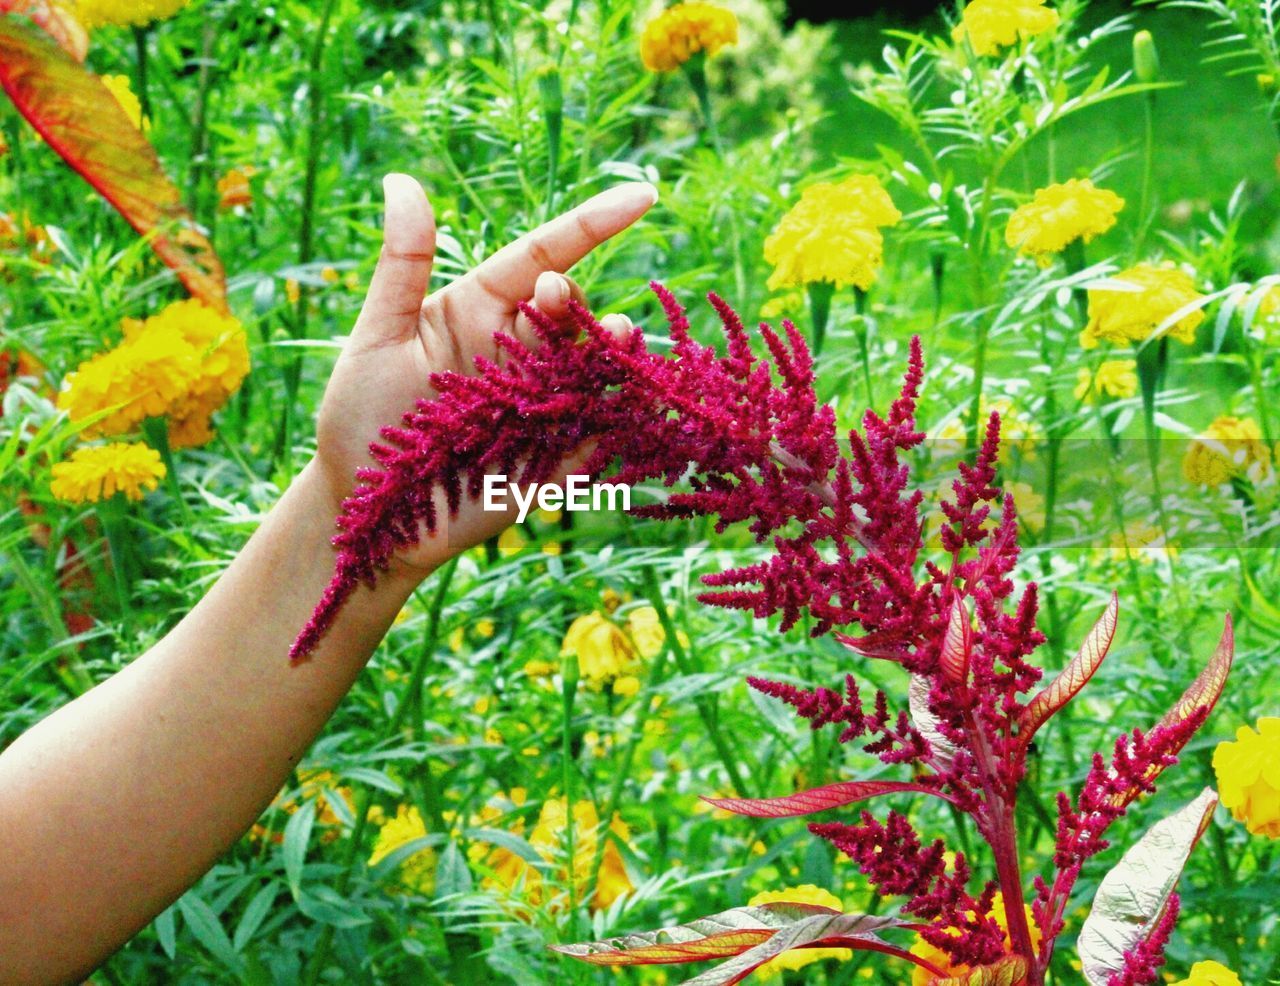 Cropped image of person touching plant